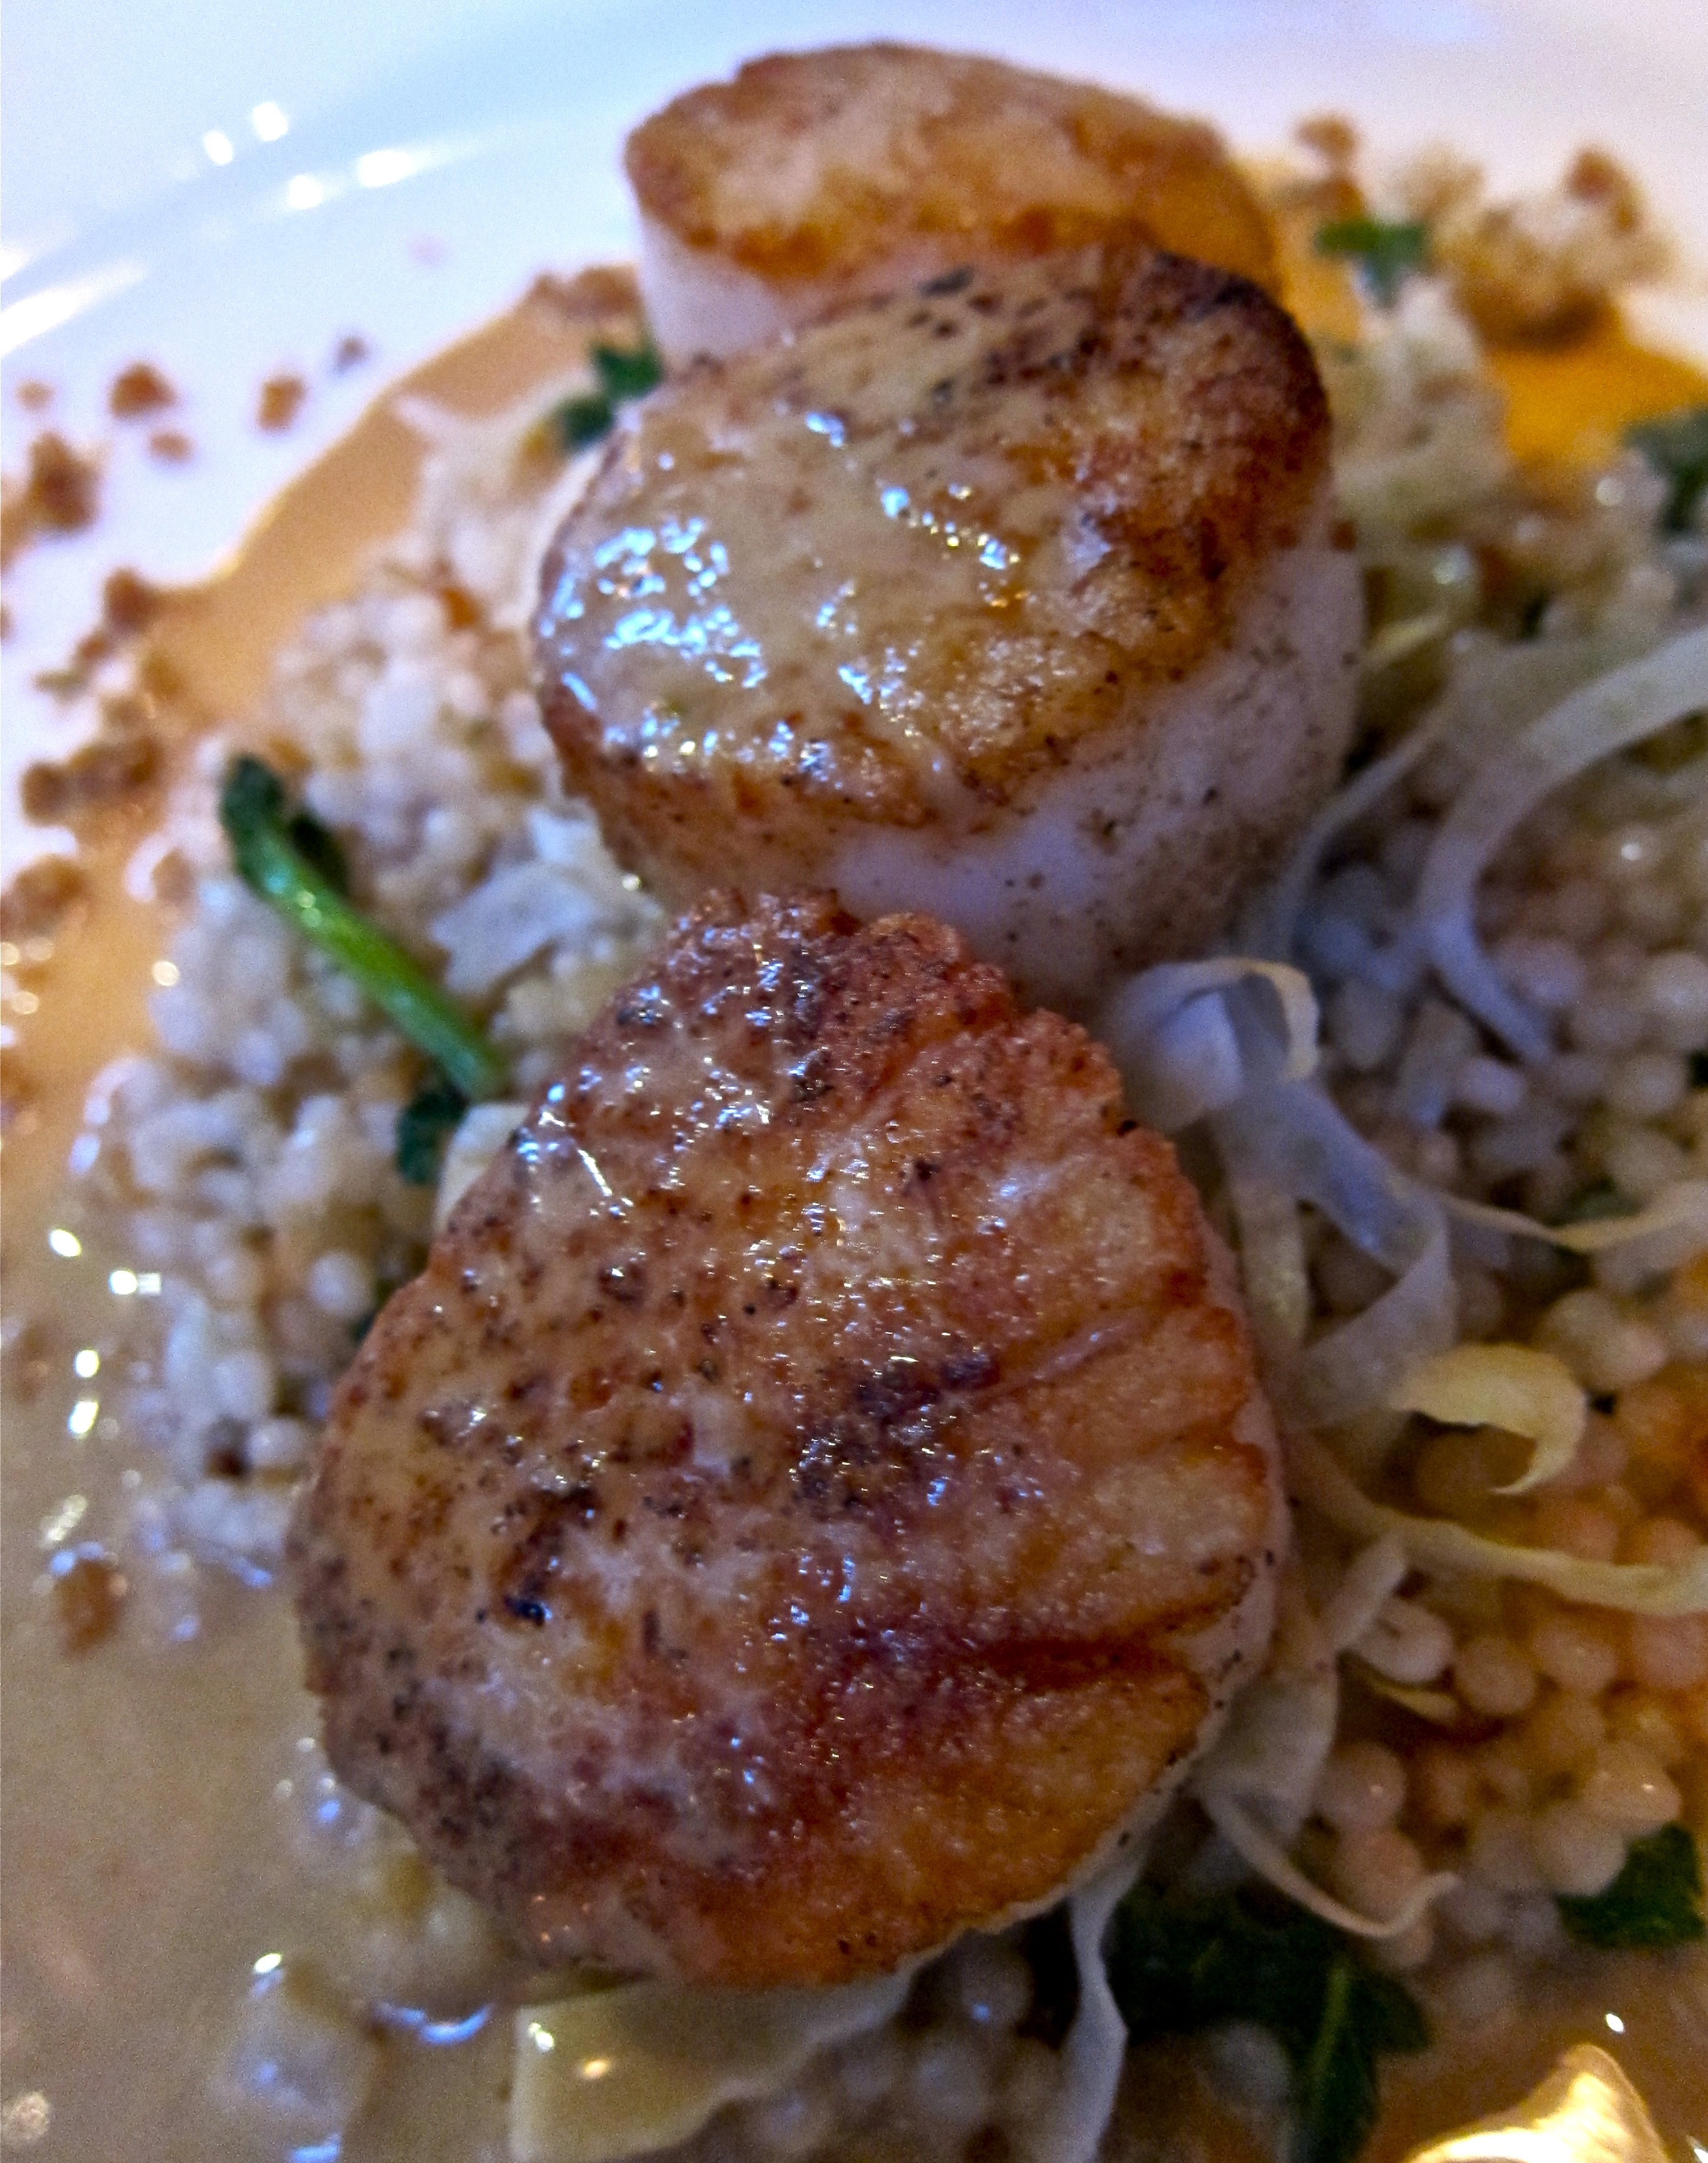 Scallops with dollops of flavor on top